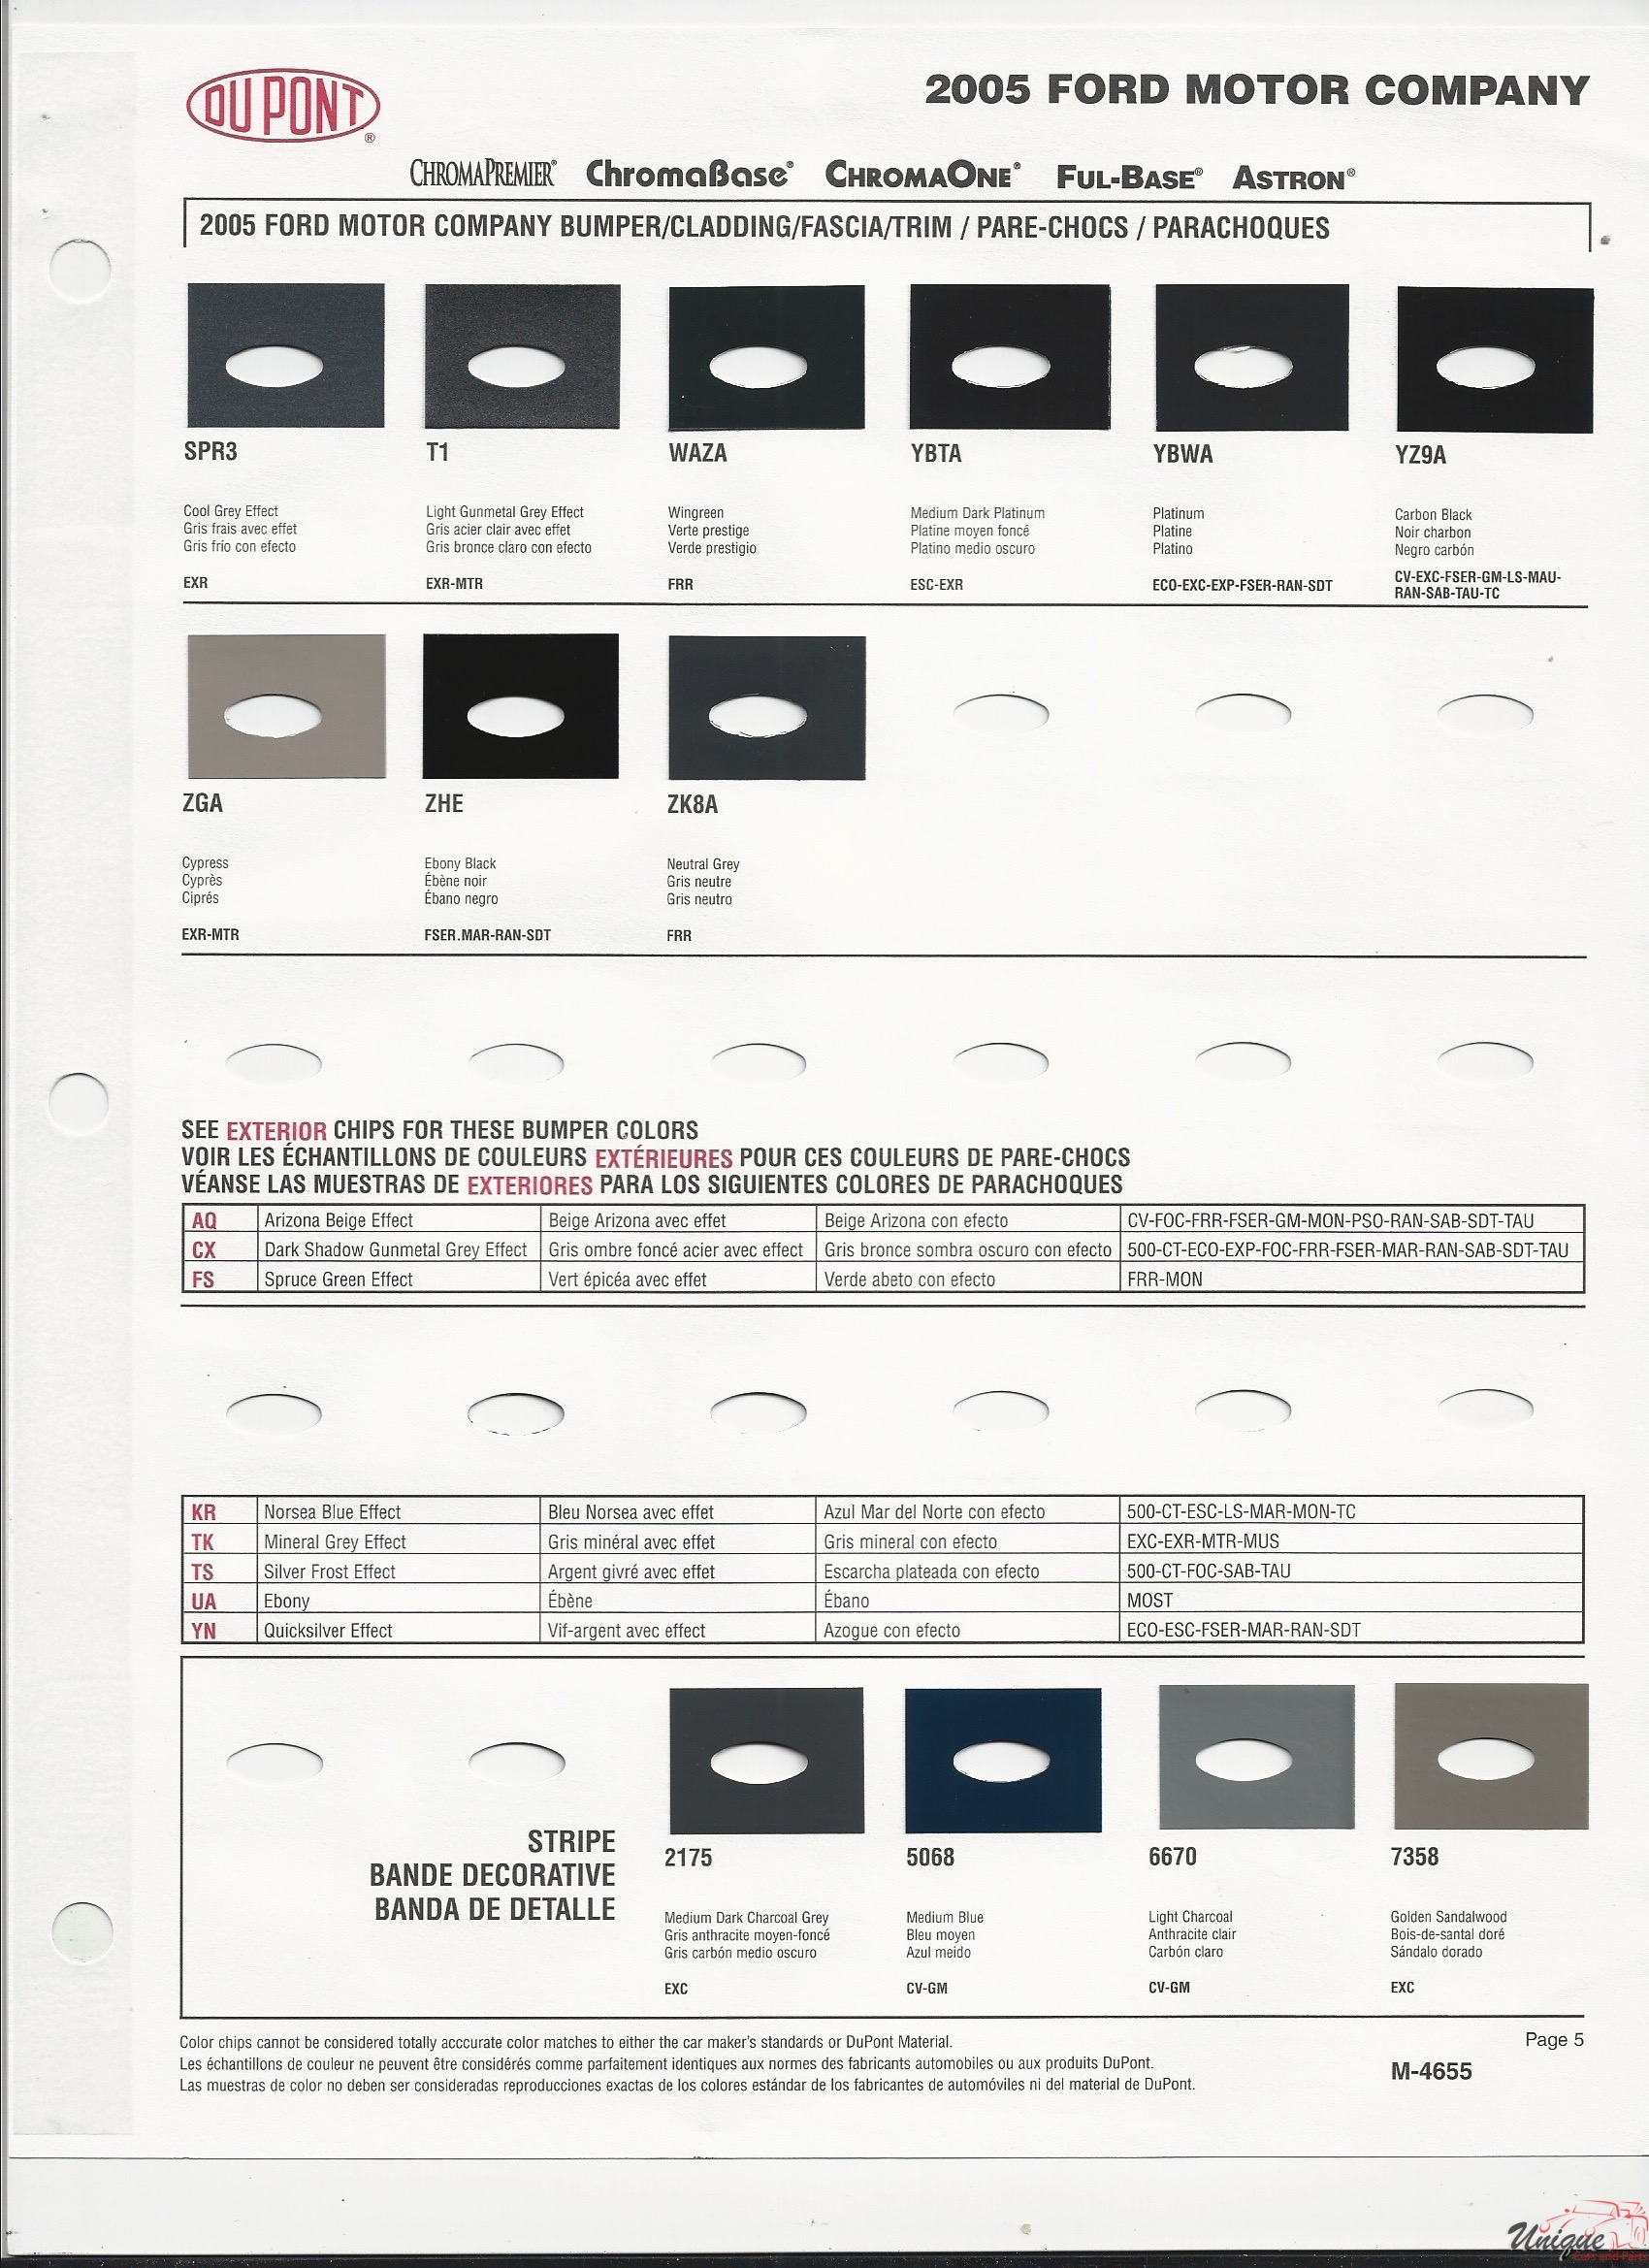 2005 Ford-4 Paint Charts